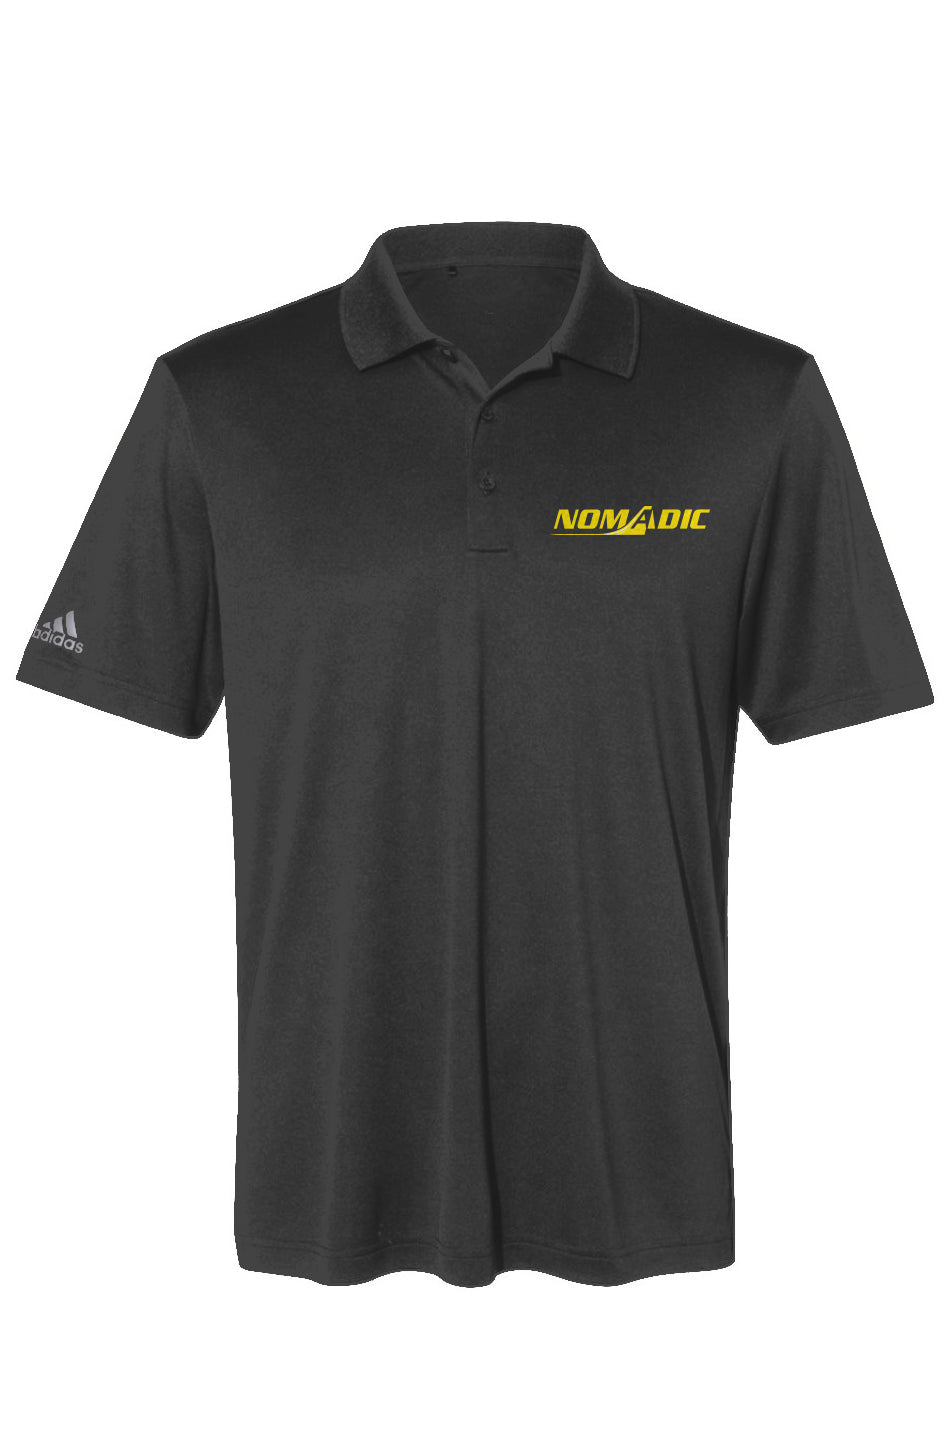 Official Nomadic Adidas Performance Polo